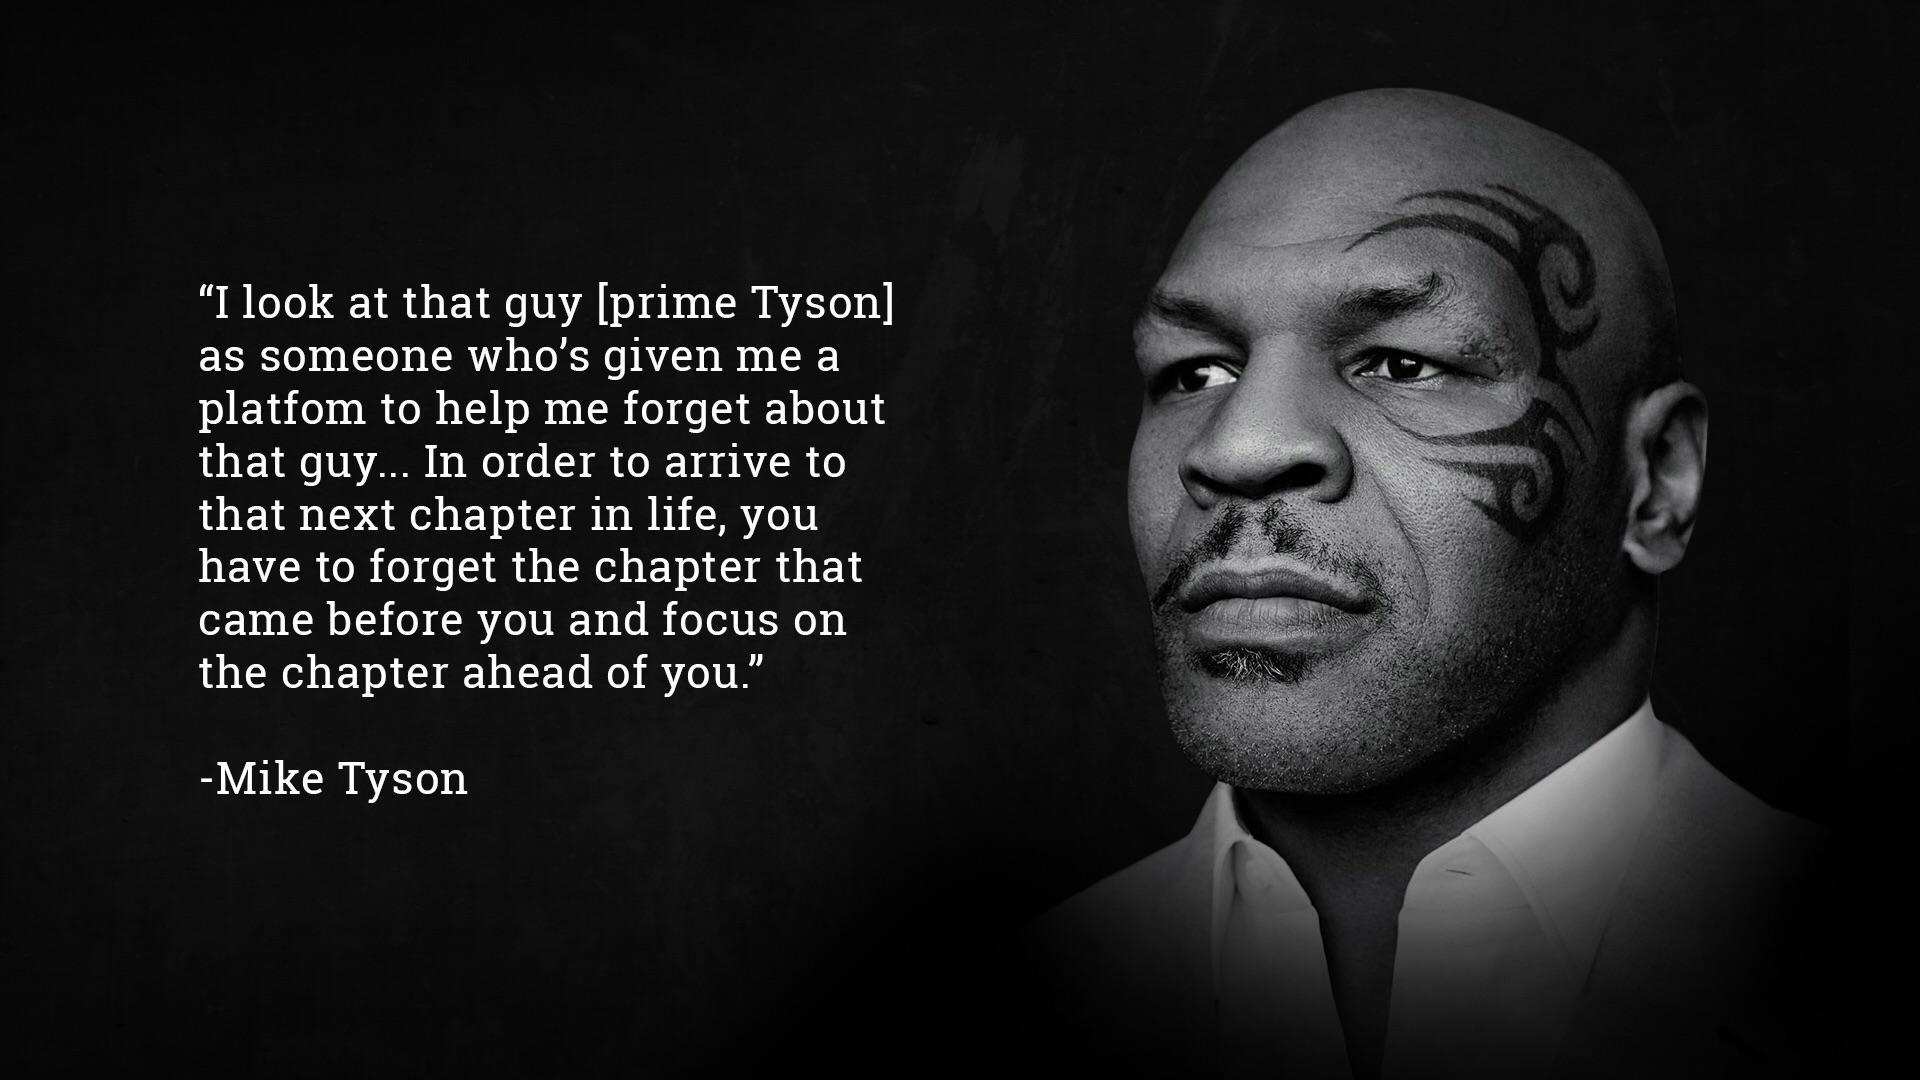 Mike Tyson Quotes Wallpapers - Top Free Mike Tyson Quotes Backgrounds ...